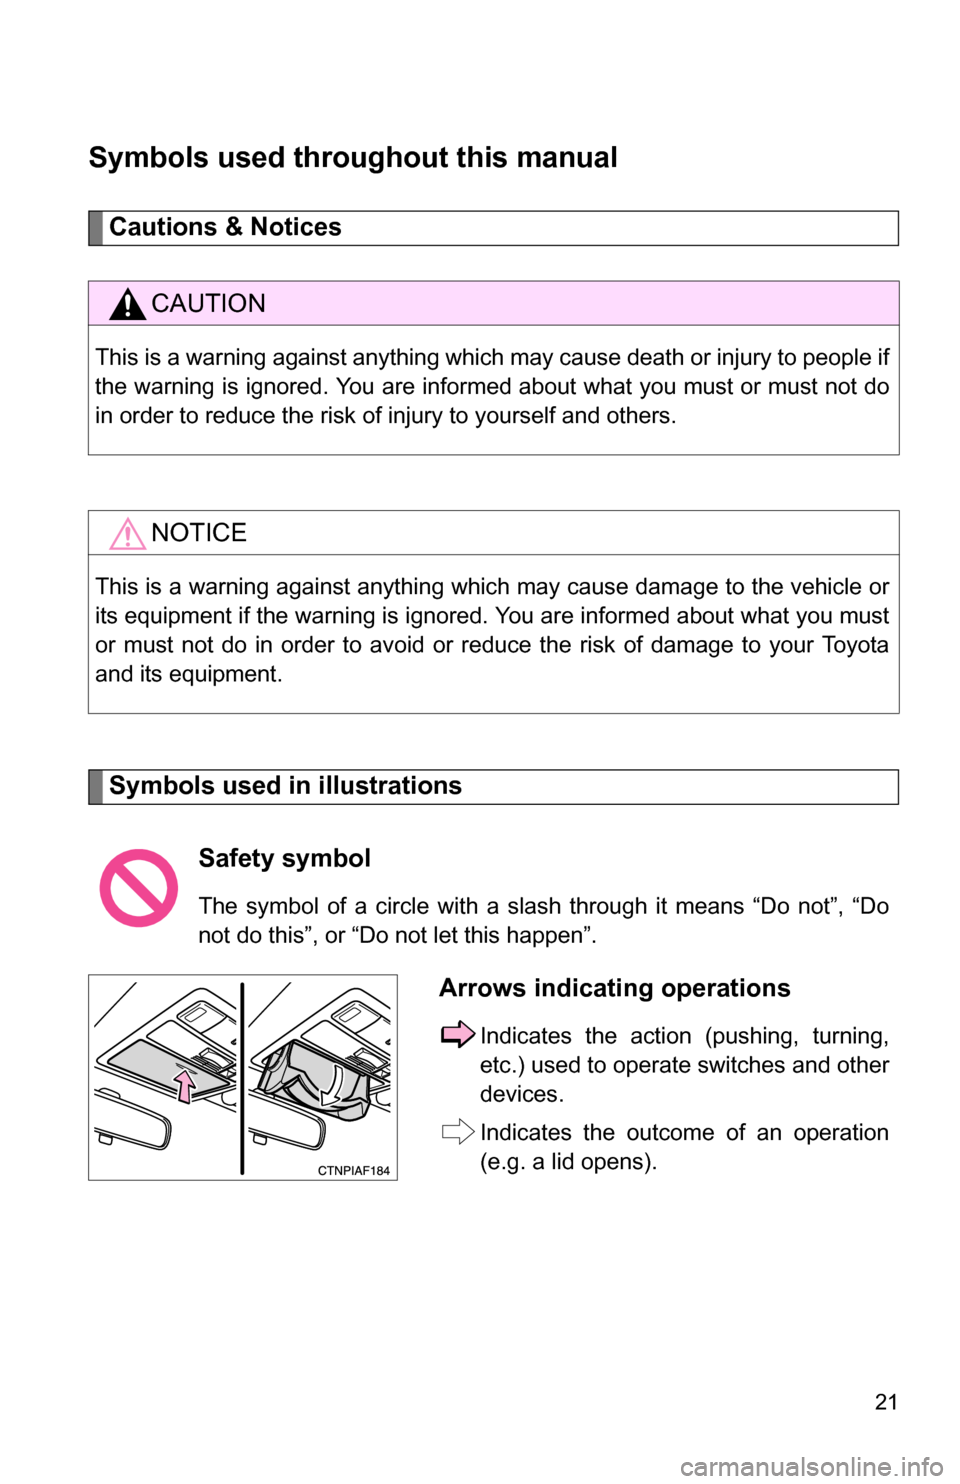 TOYOTA RAV4 2012 XA30 / 3.G Owners Manual 21
Symbols used throughout this manual
Cautions & Notices 
Symbols used in illustrations
CAUTION
This is a warning against anything which may cause death or injury to people if
the warning is ignored.